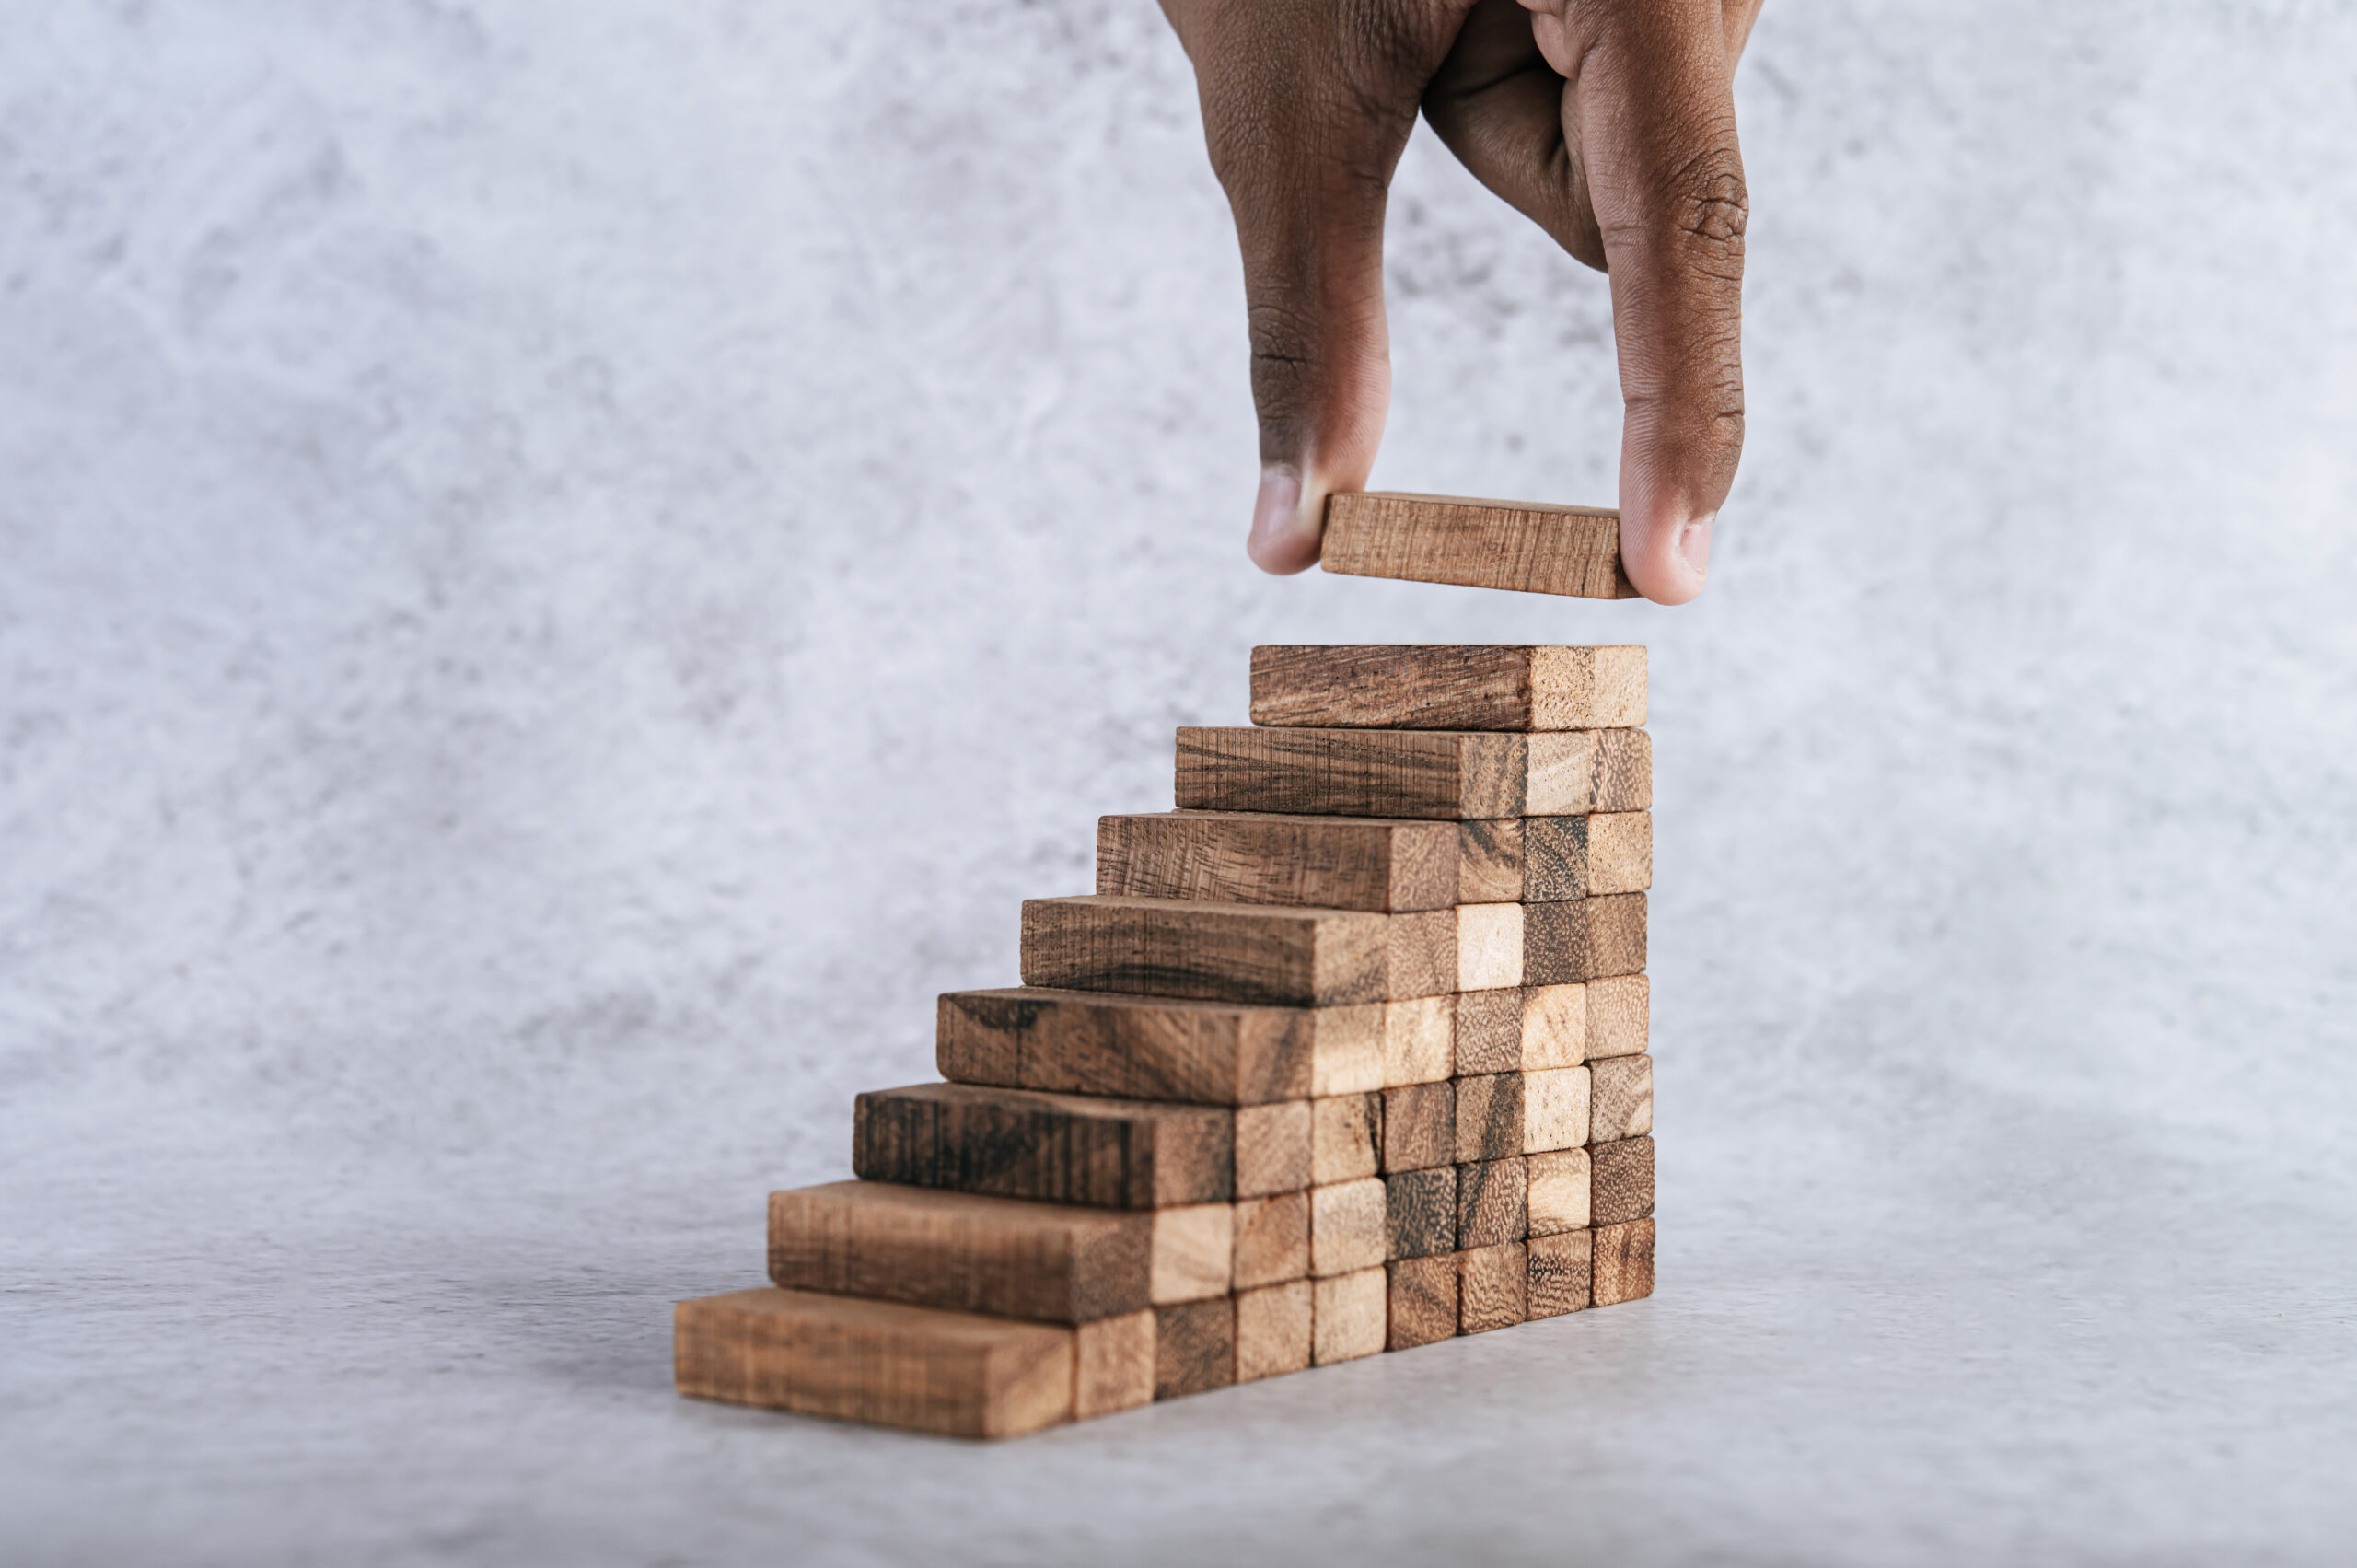 Stacking wooden blocks is at risk in creating business growth ideas.